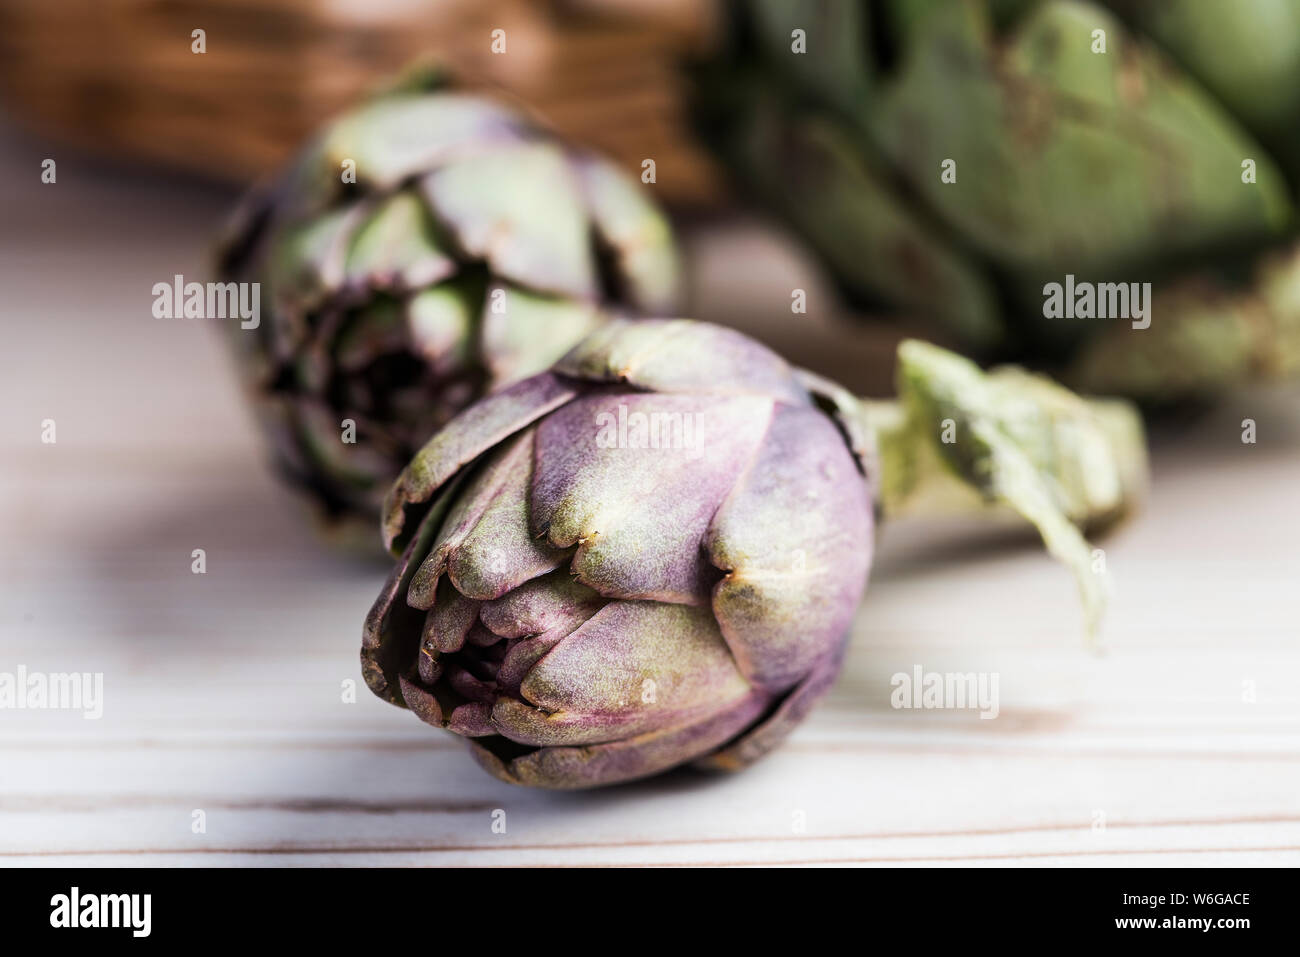 Baby violet artichokes, whole on wooden table with basket in background. Stock Photo